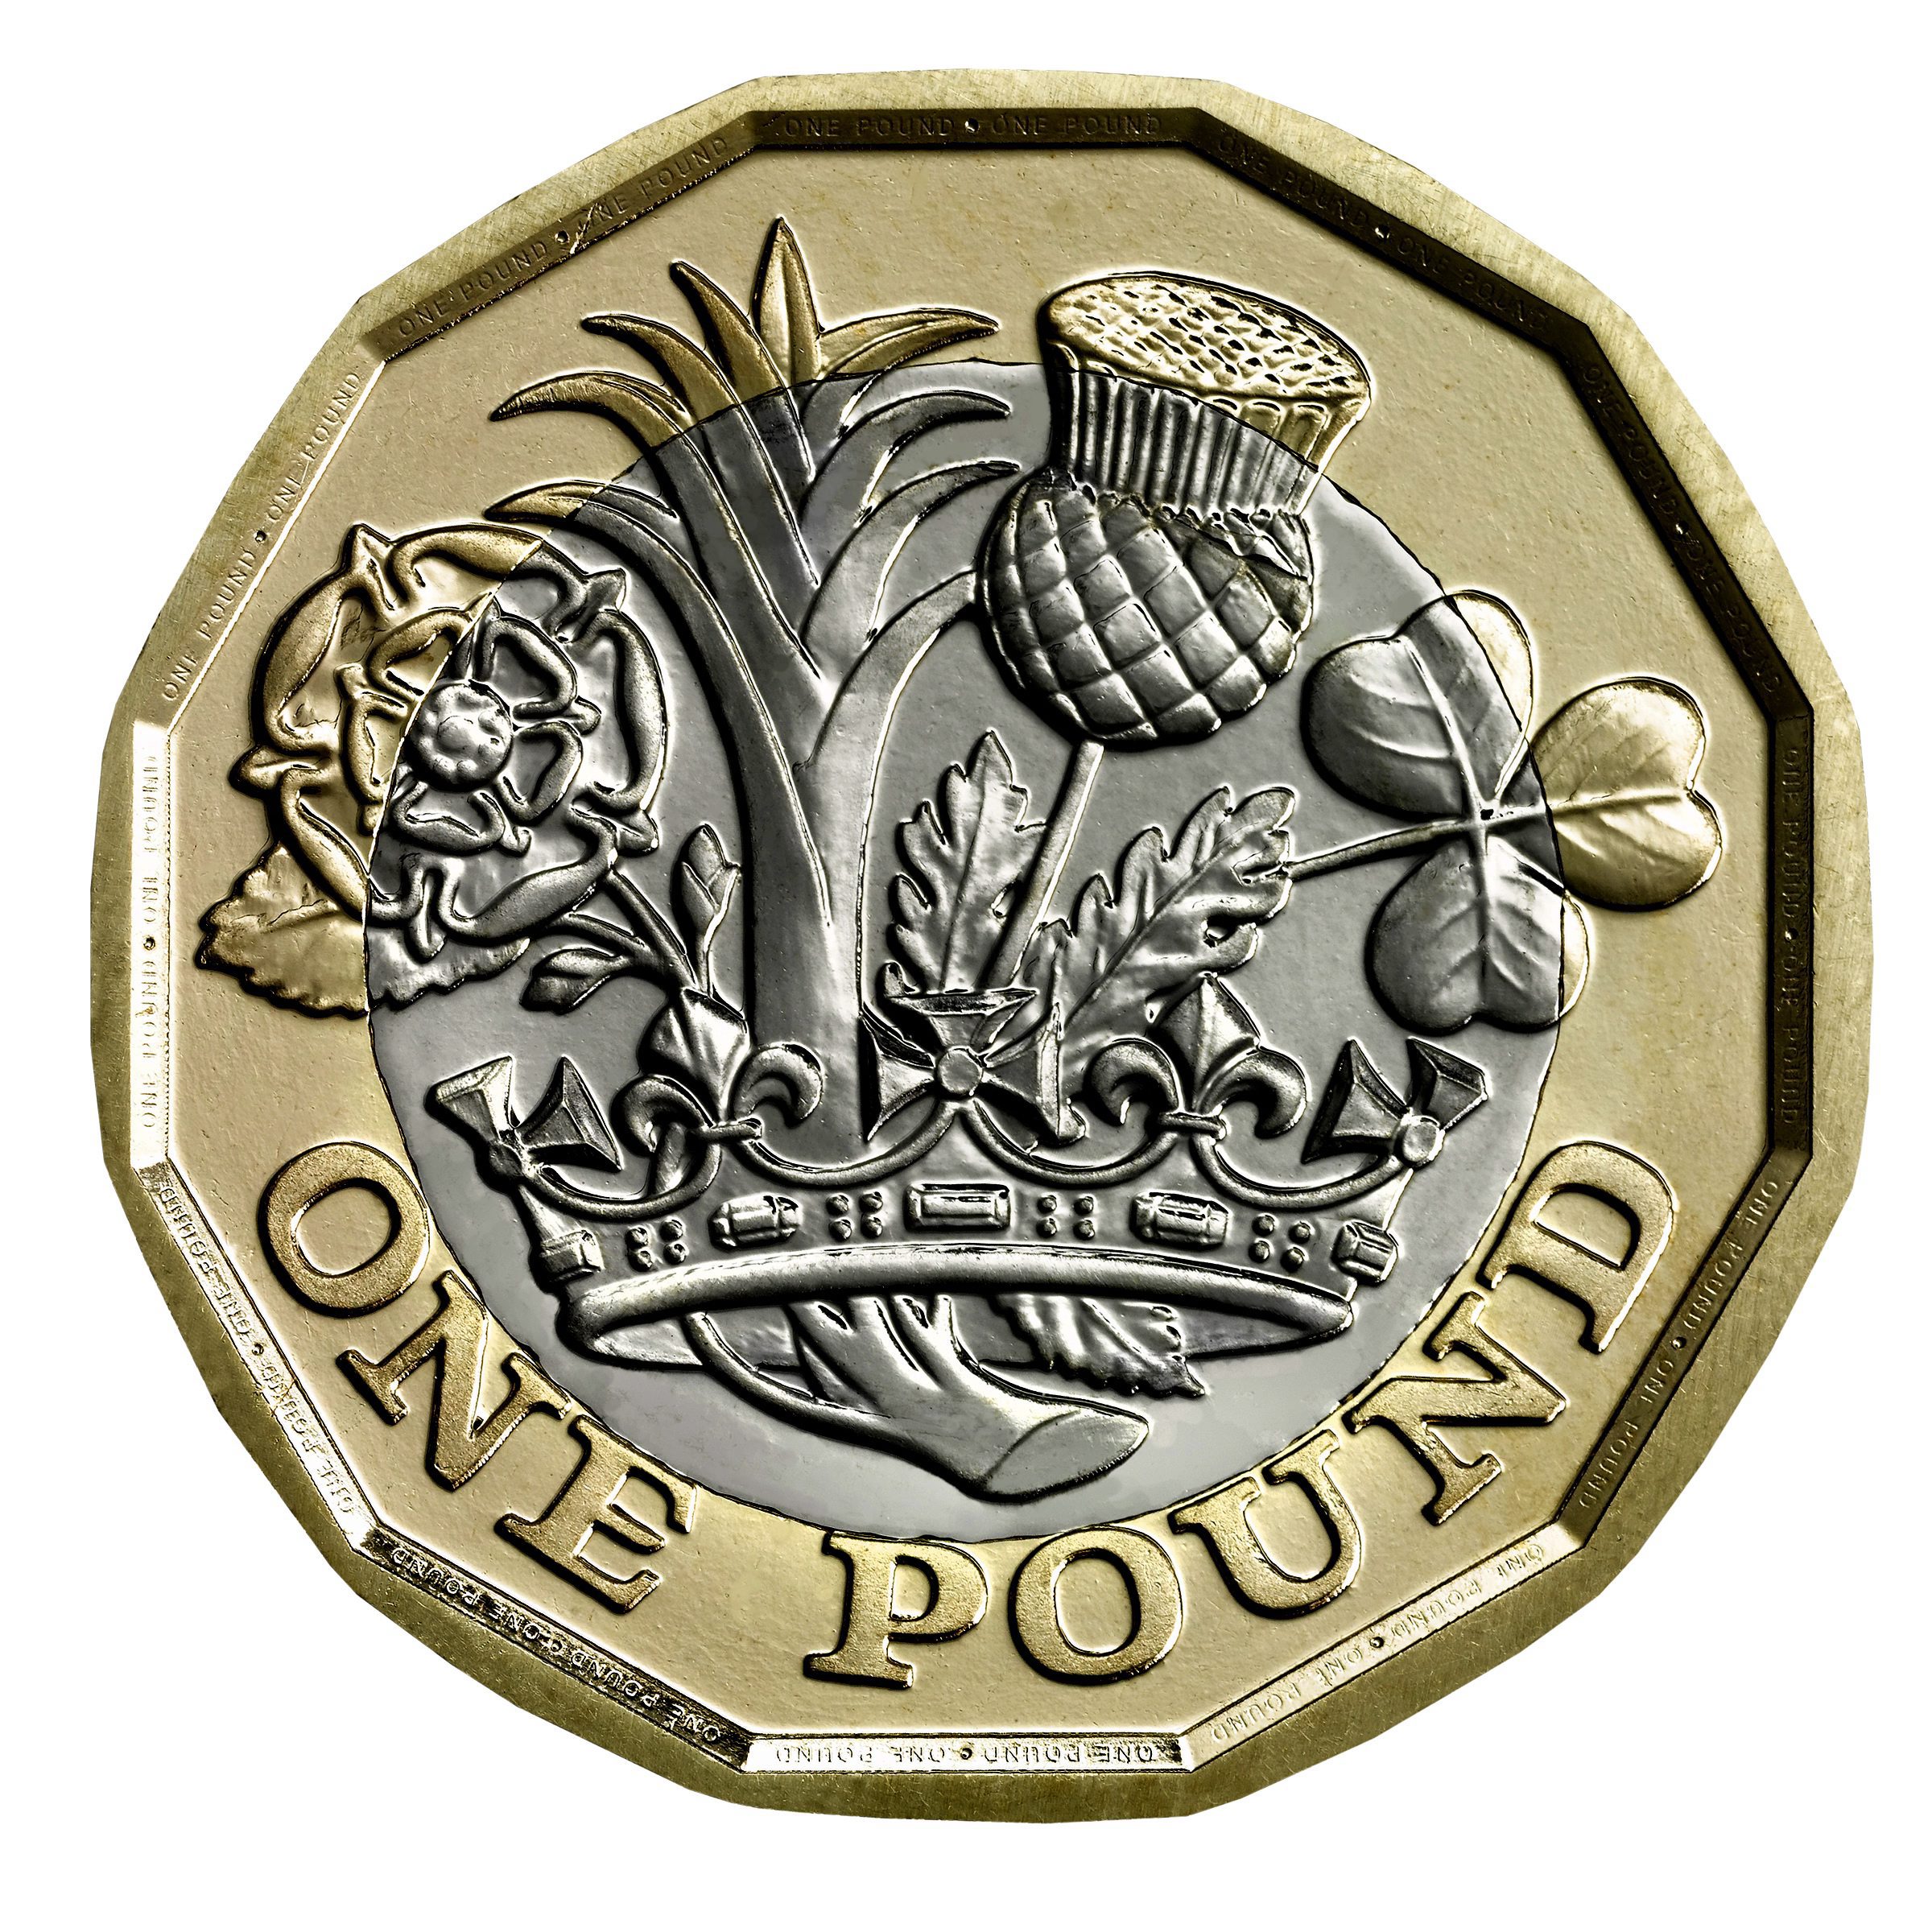 2015-03-18 15:11:47 epa04667921 A handout image provided by the British Royal Mint on 18 March 2015 in London, Britain, shows a new design for the One Pound Sterling Coin. The design was created by a 15 year old British schoolboy David Pearce, and as part of a national competition. The design features the leek, thistle, shamrock and rose, coming out of a royal crown to represent all nations within the United Kingdom. It will be in circulation in 2017. EPA/HO HANDOUT EDITORIAL USE ONLY/NO SALES